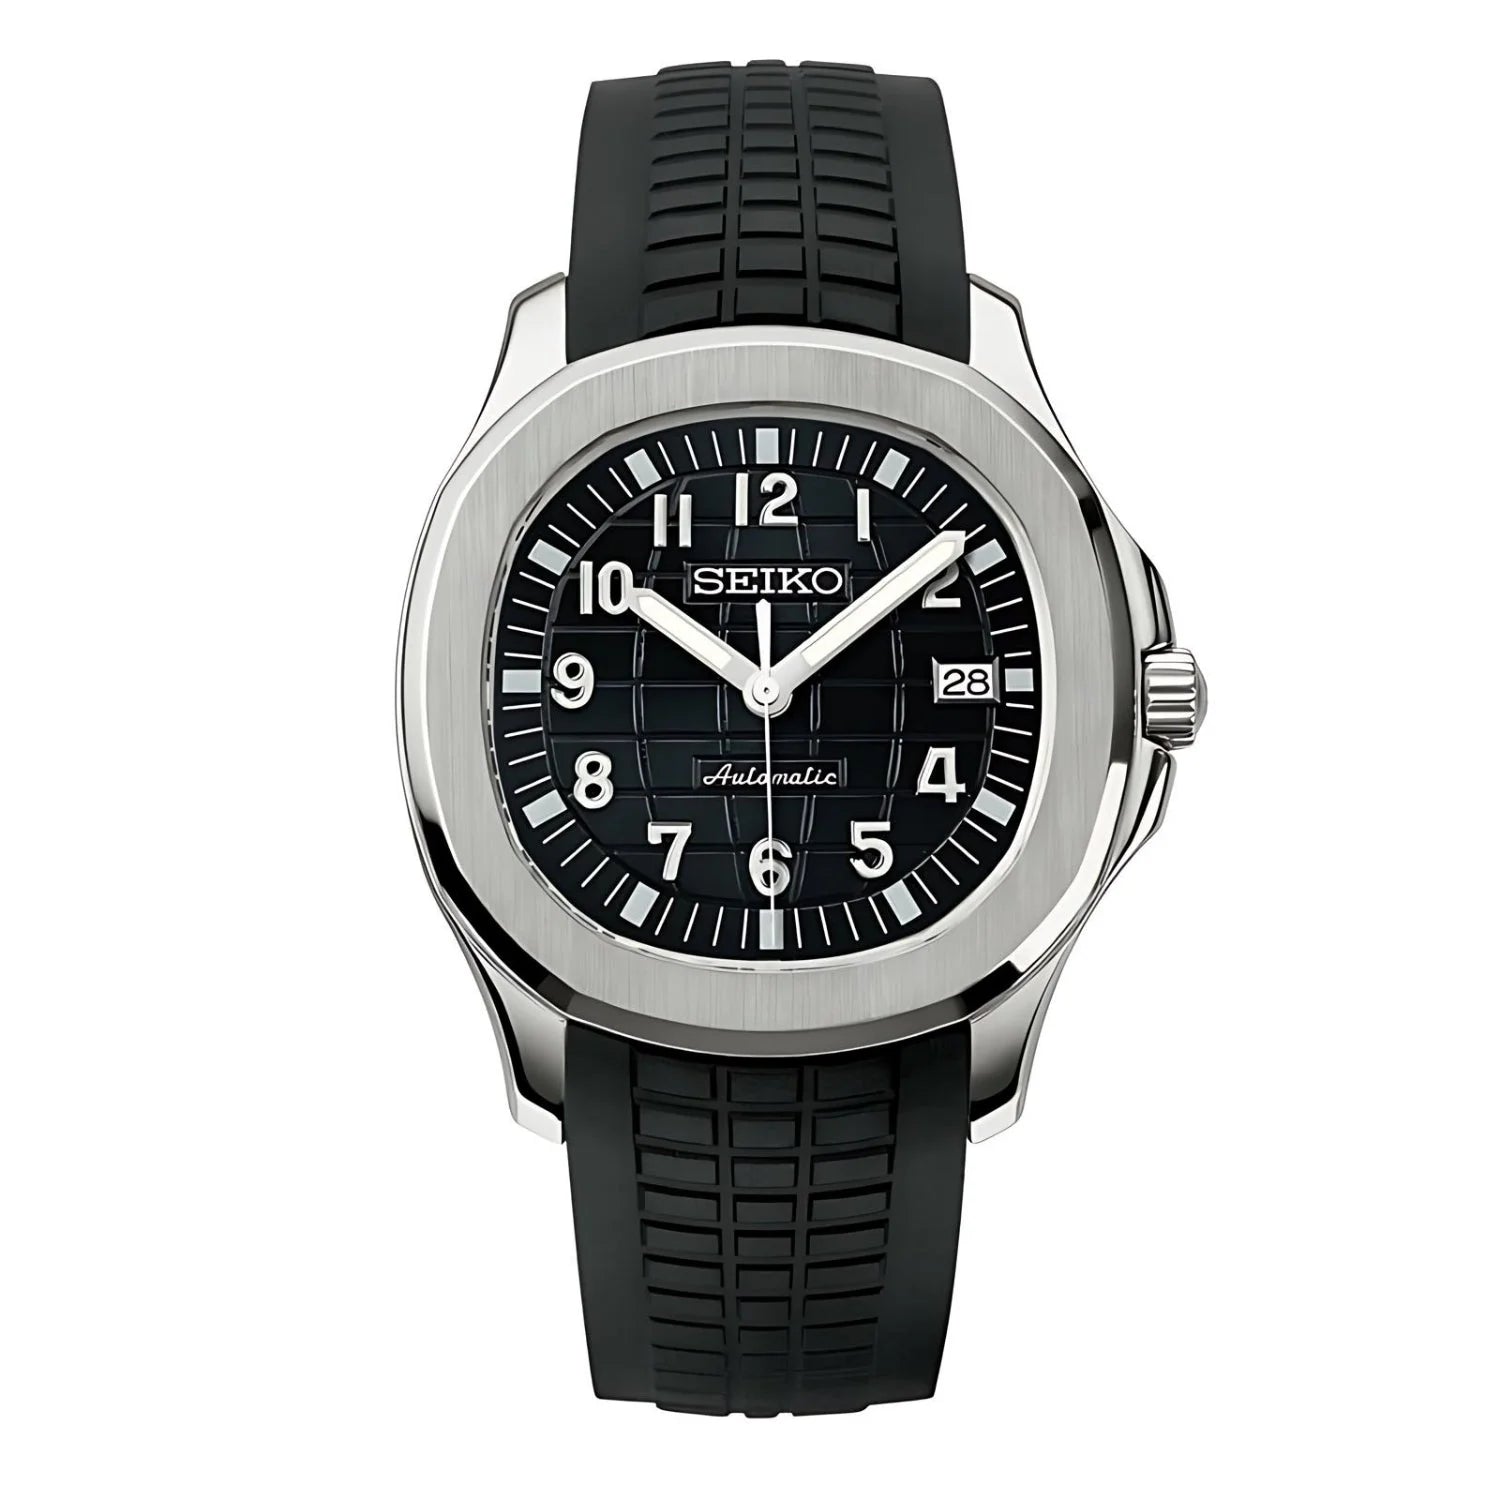 Seikonaut Black Seiko Mod Watch With Black Dial And Rubber Strap In a Sturdy Case